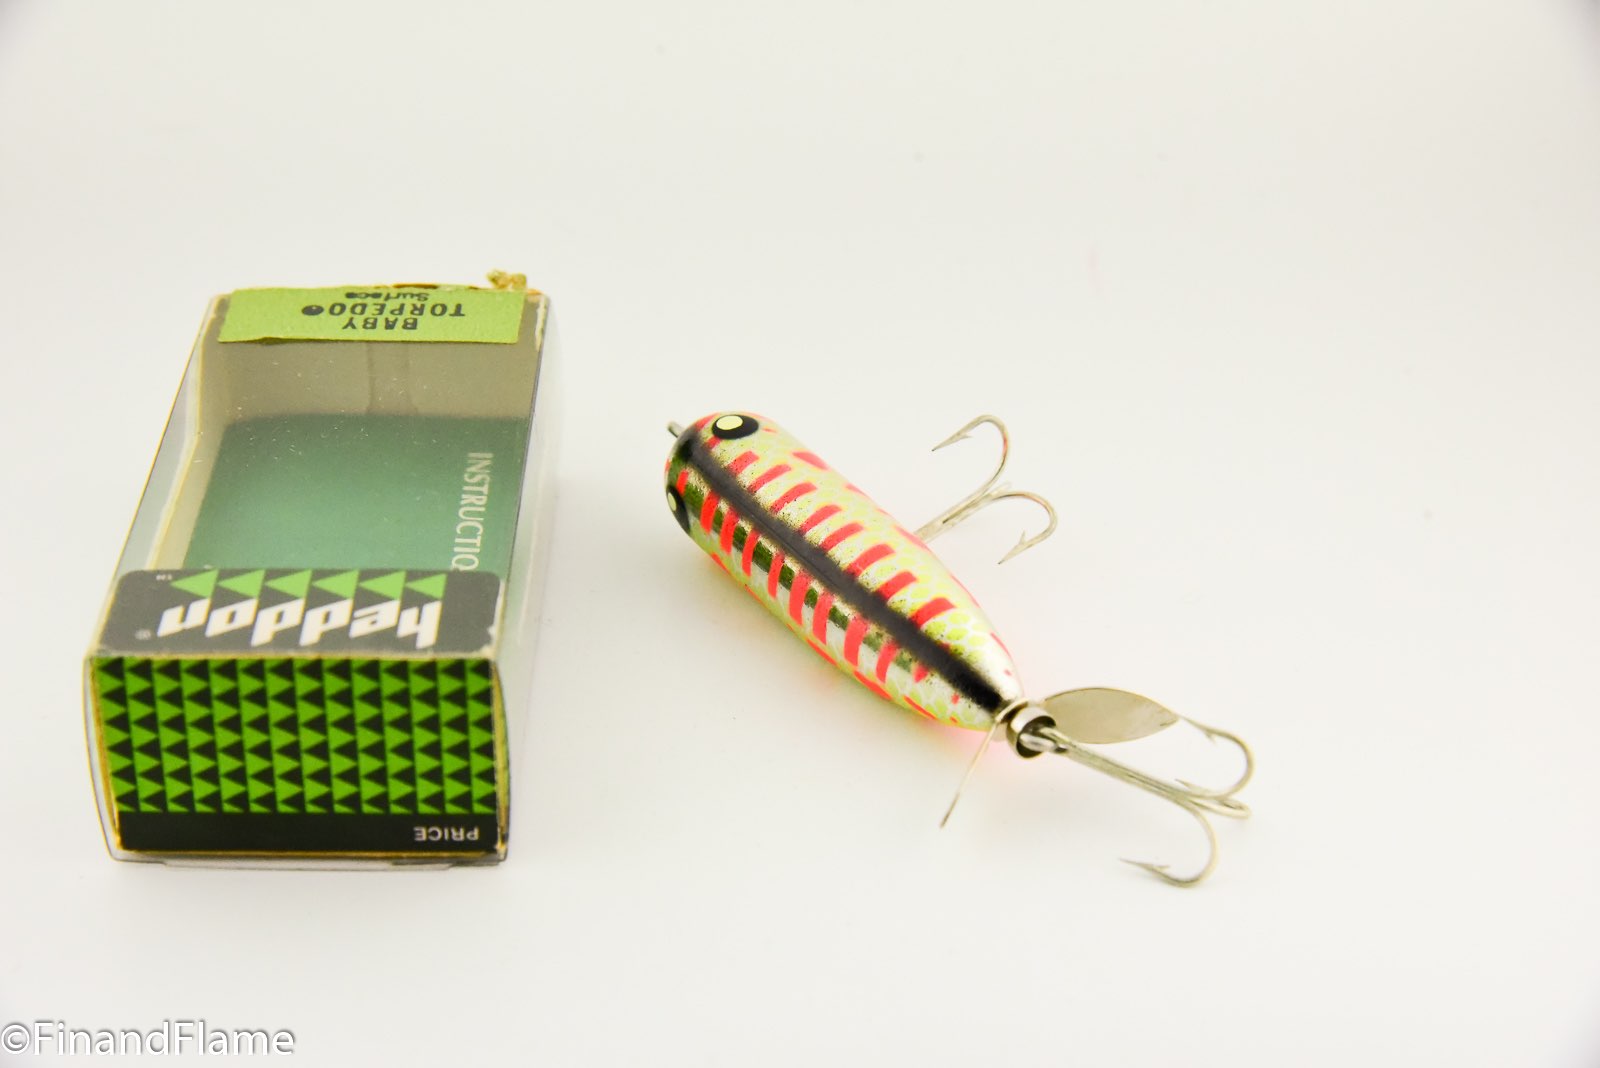 Heddon Baby Torpedo Lure EX in Box VCD